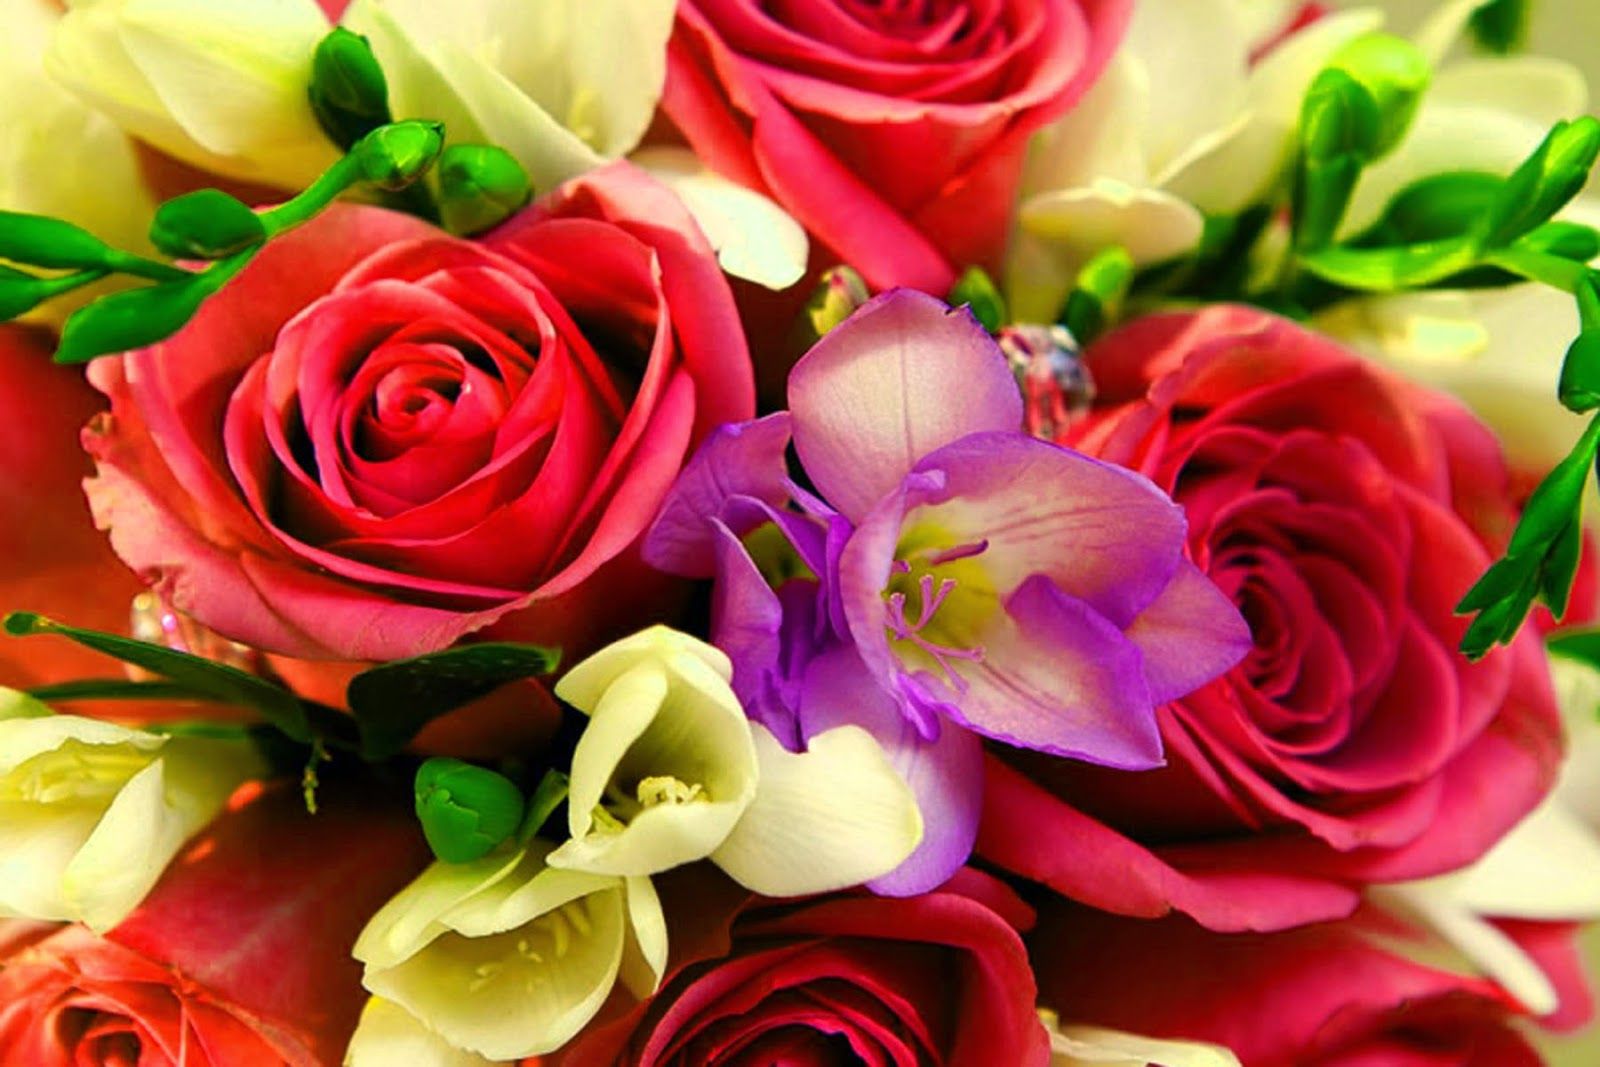 Colorful Bouquet of Flowers Wallpaper Background!